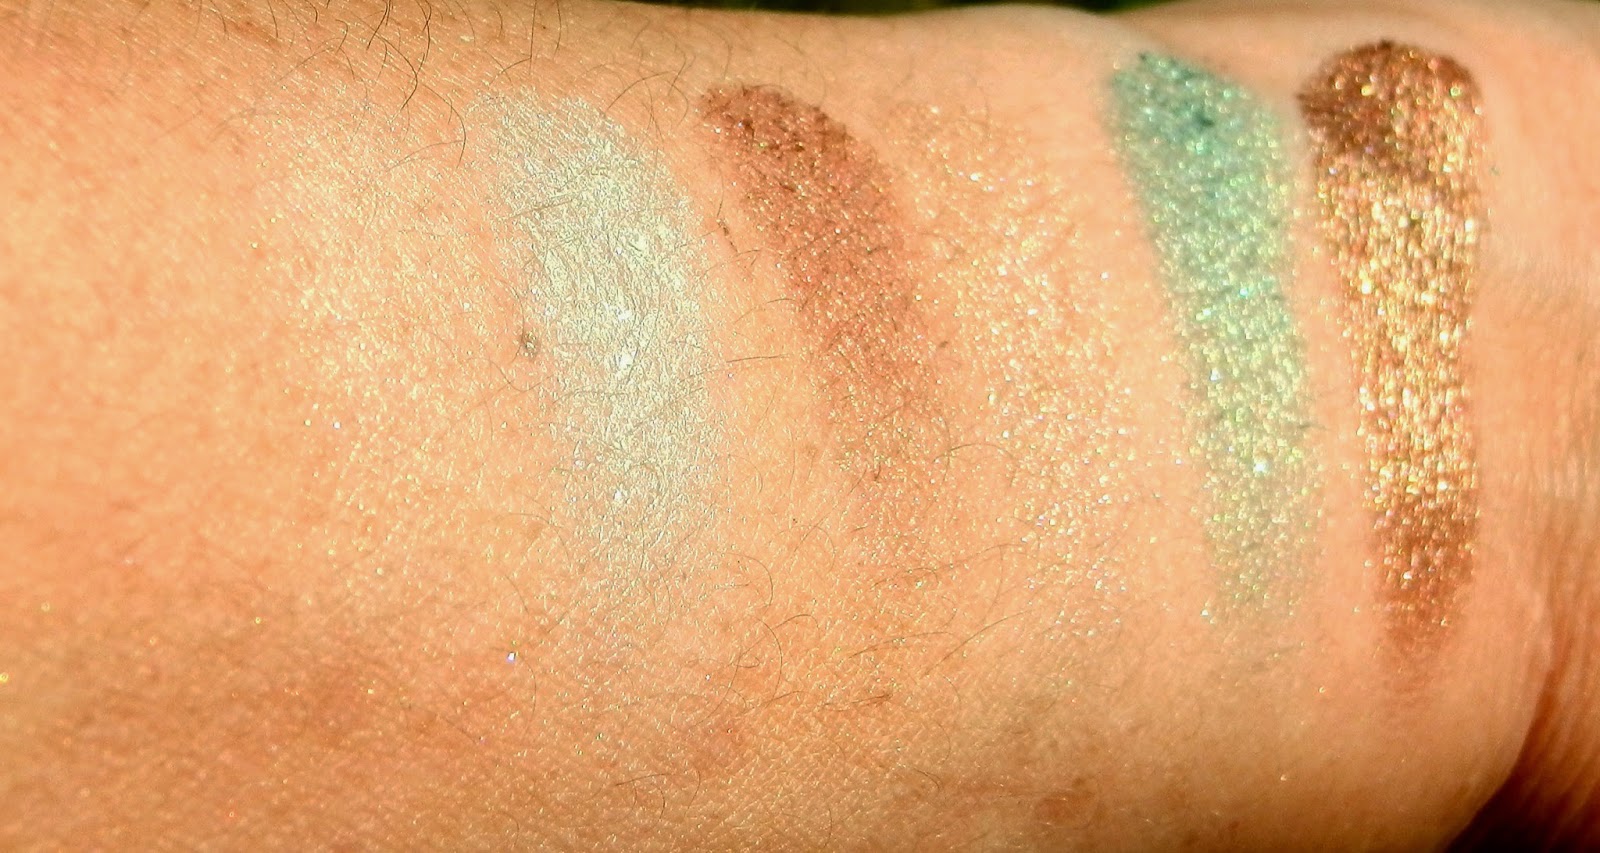 Pixi Mesmerizing Mineral Palette Emerald Swatches 